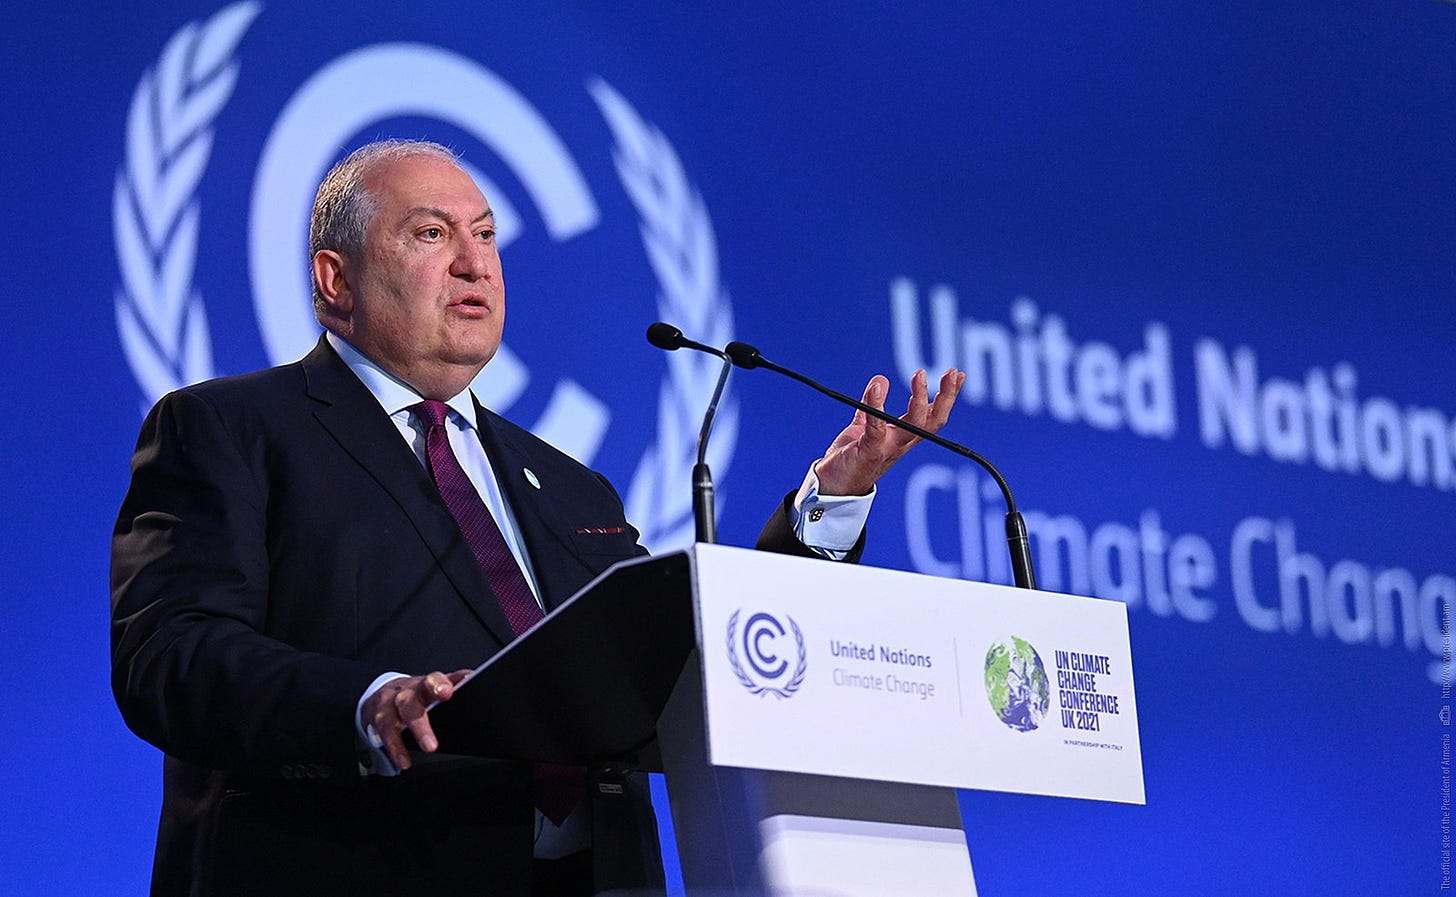 https://commons.wikimedia.org/wiki/File:Armen_Sarkissian_attends_the_2021_United_Nations_Climate_Change_Conference_%2875%29.jpg